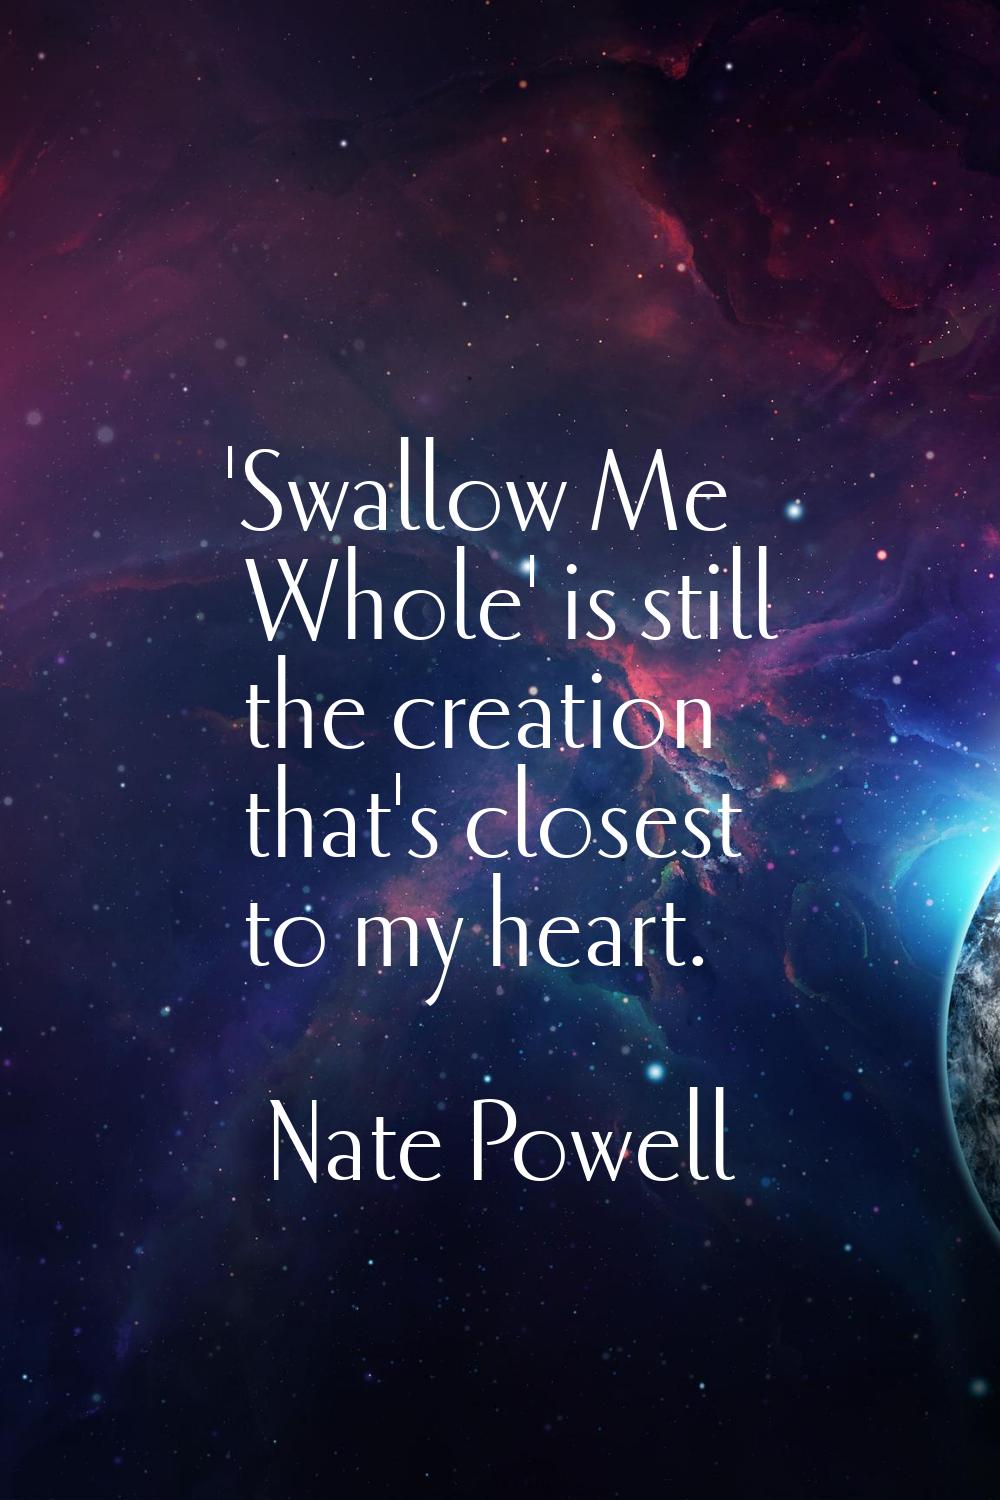 'Swallow Me Whole' is still the creation that's closest to my heart.